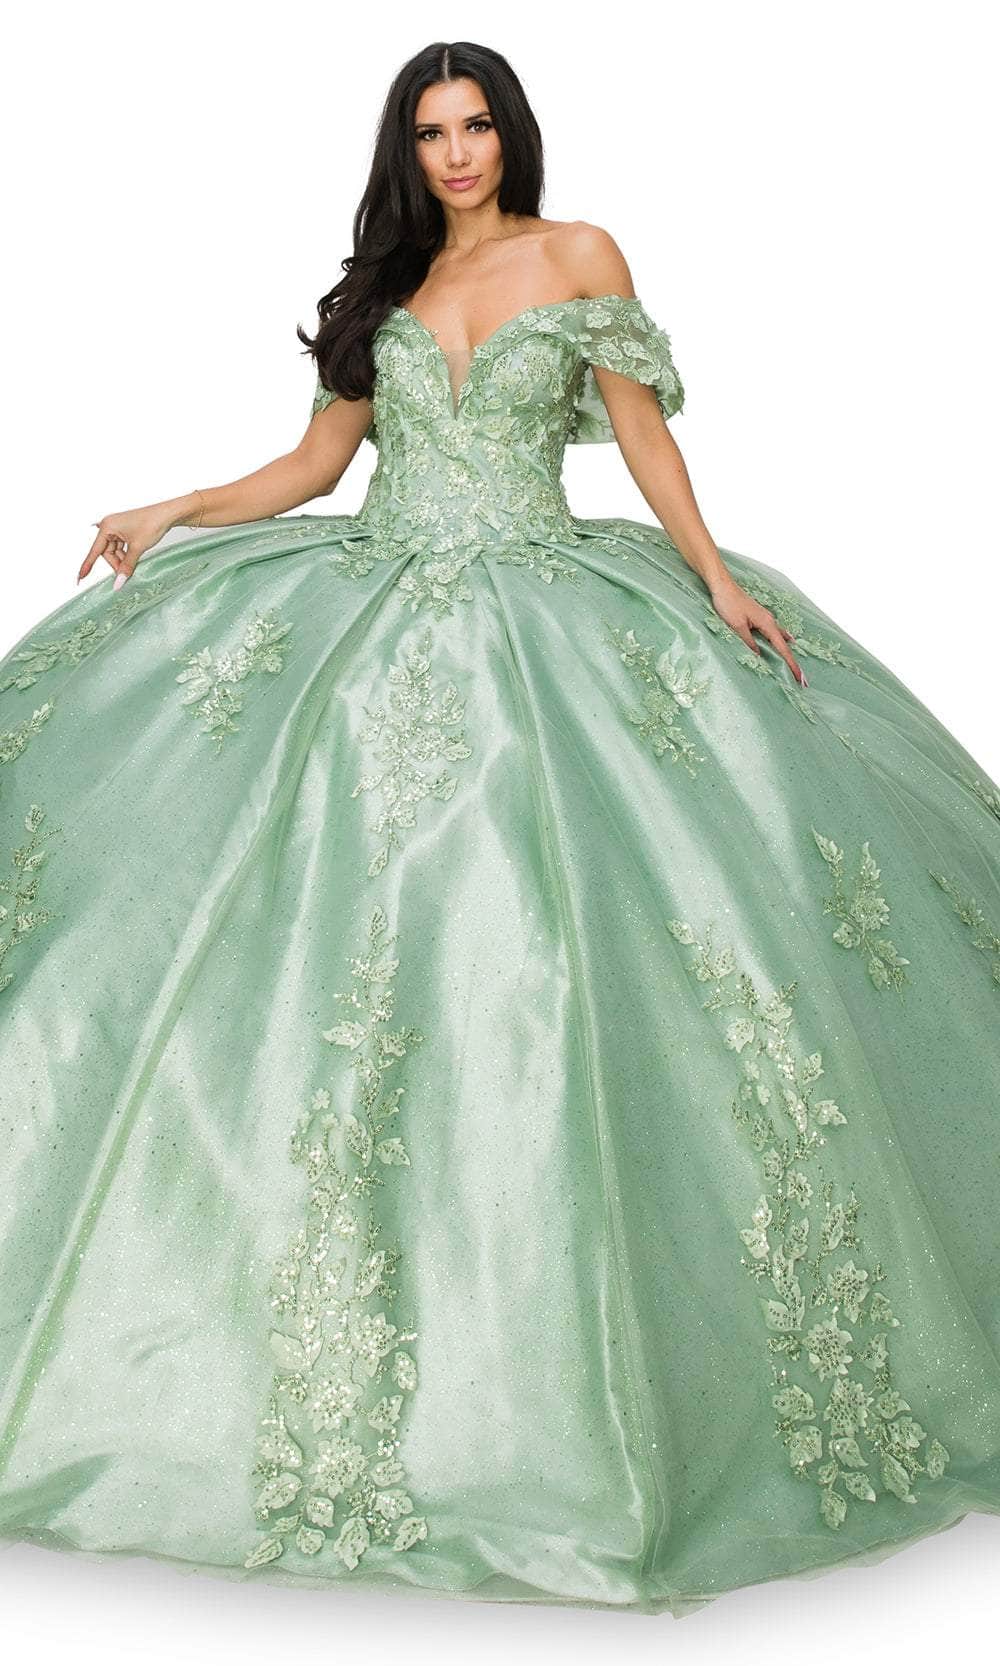 Cinderella Couture 8045J - Off Shoulder Sequin Lace Ballgown Special Occasion Dress